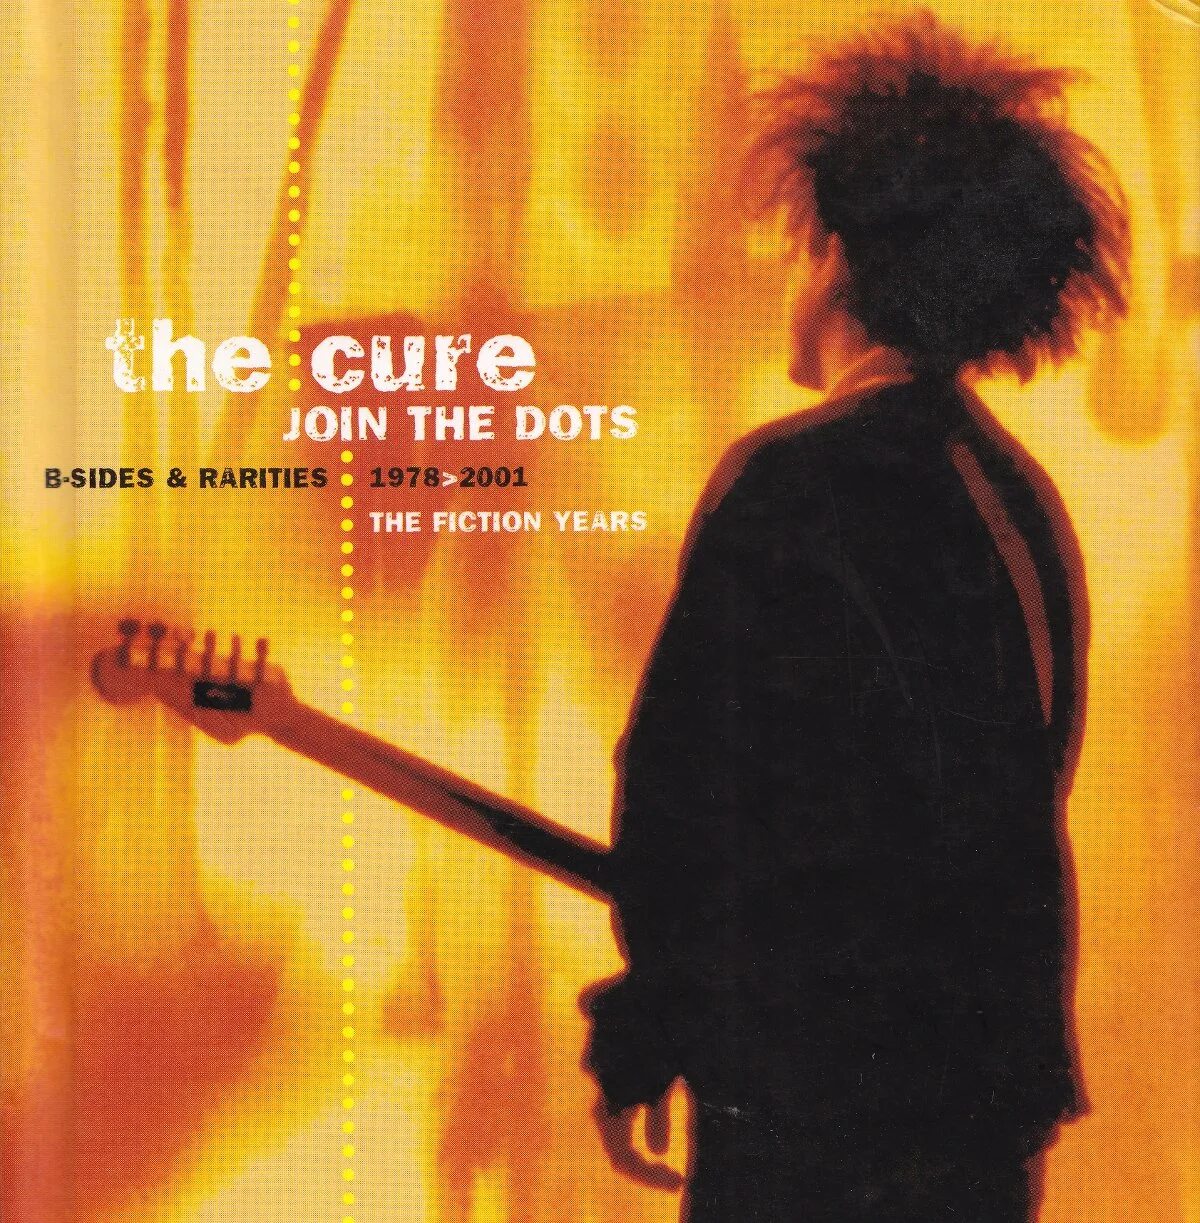 Cure перевод на русский. The Cure join the Dots: b-Sides and Rarities, 1978-2001. Join the Dots - the b-Sides & Rarities the Cure. The Cure join the Dots. The Cure 2004.